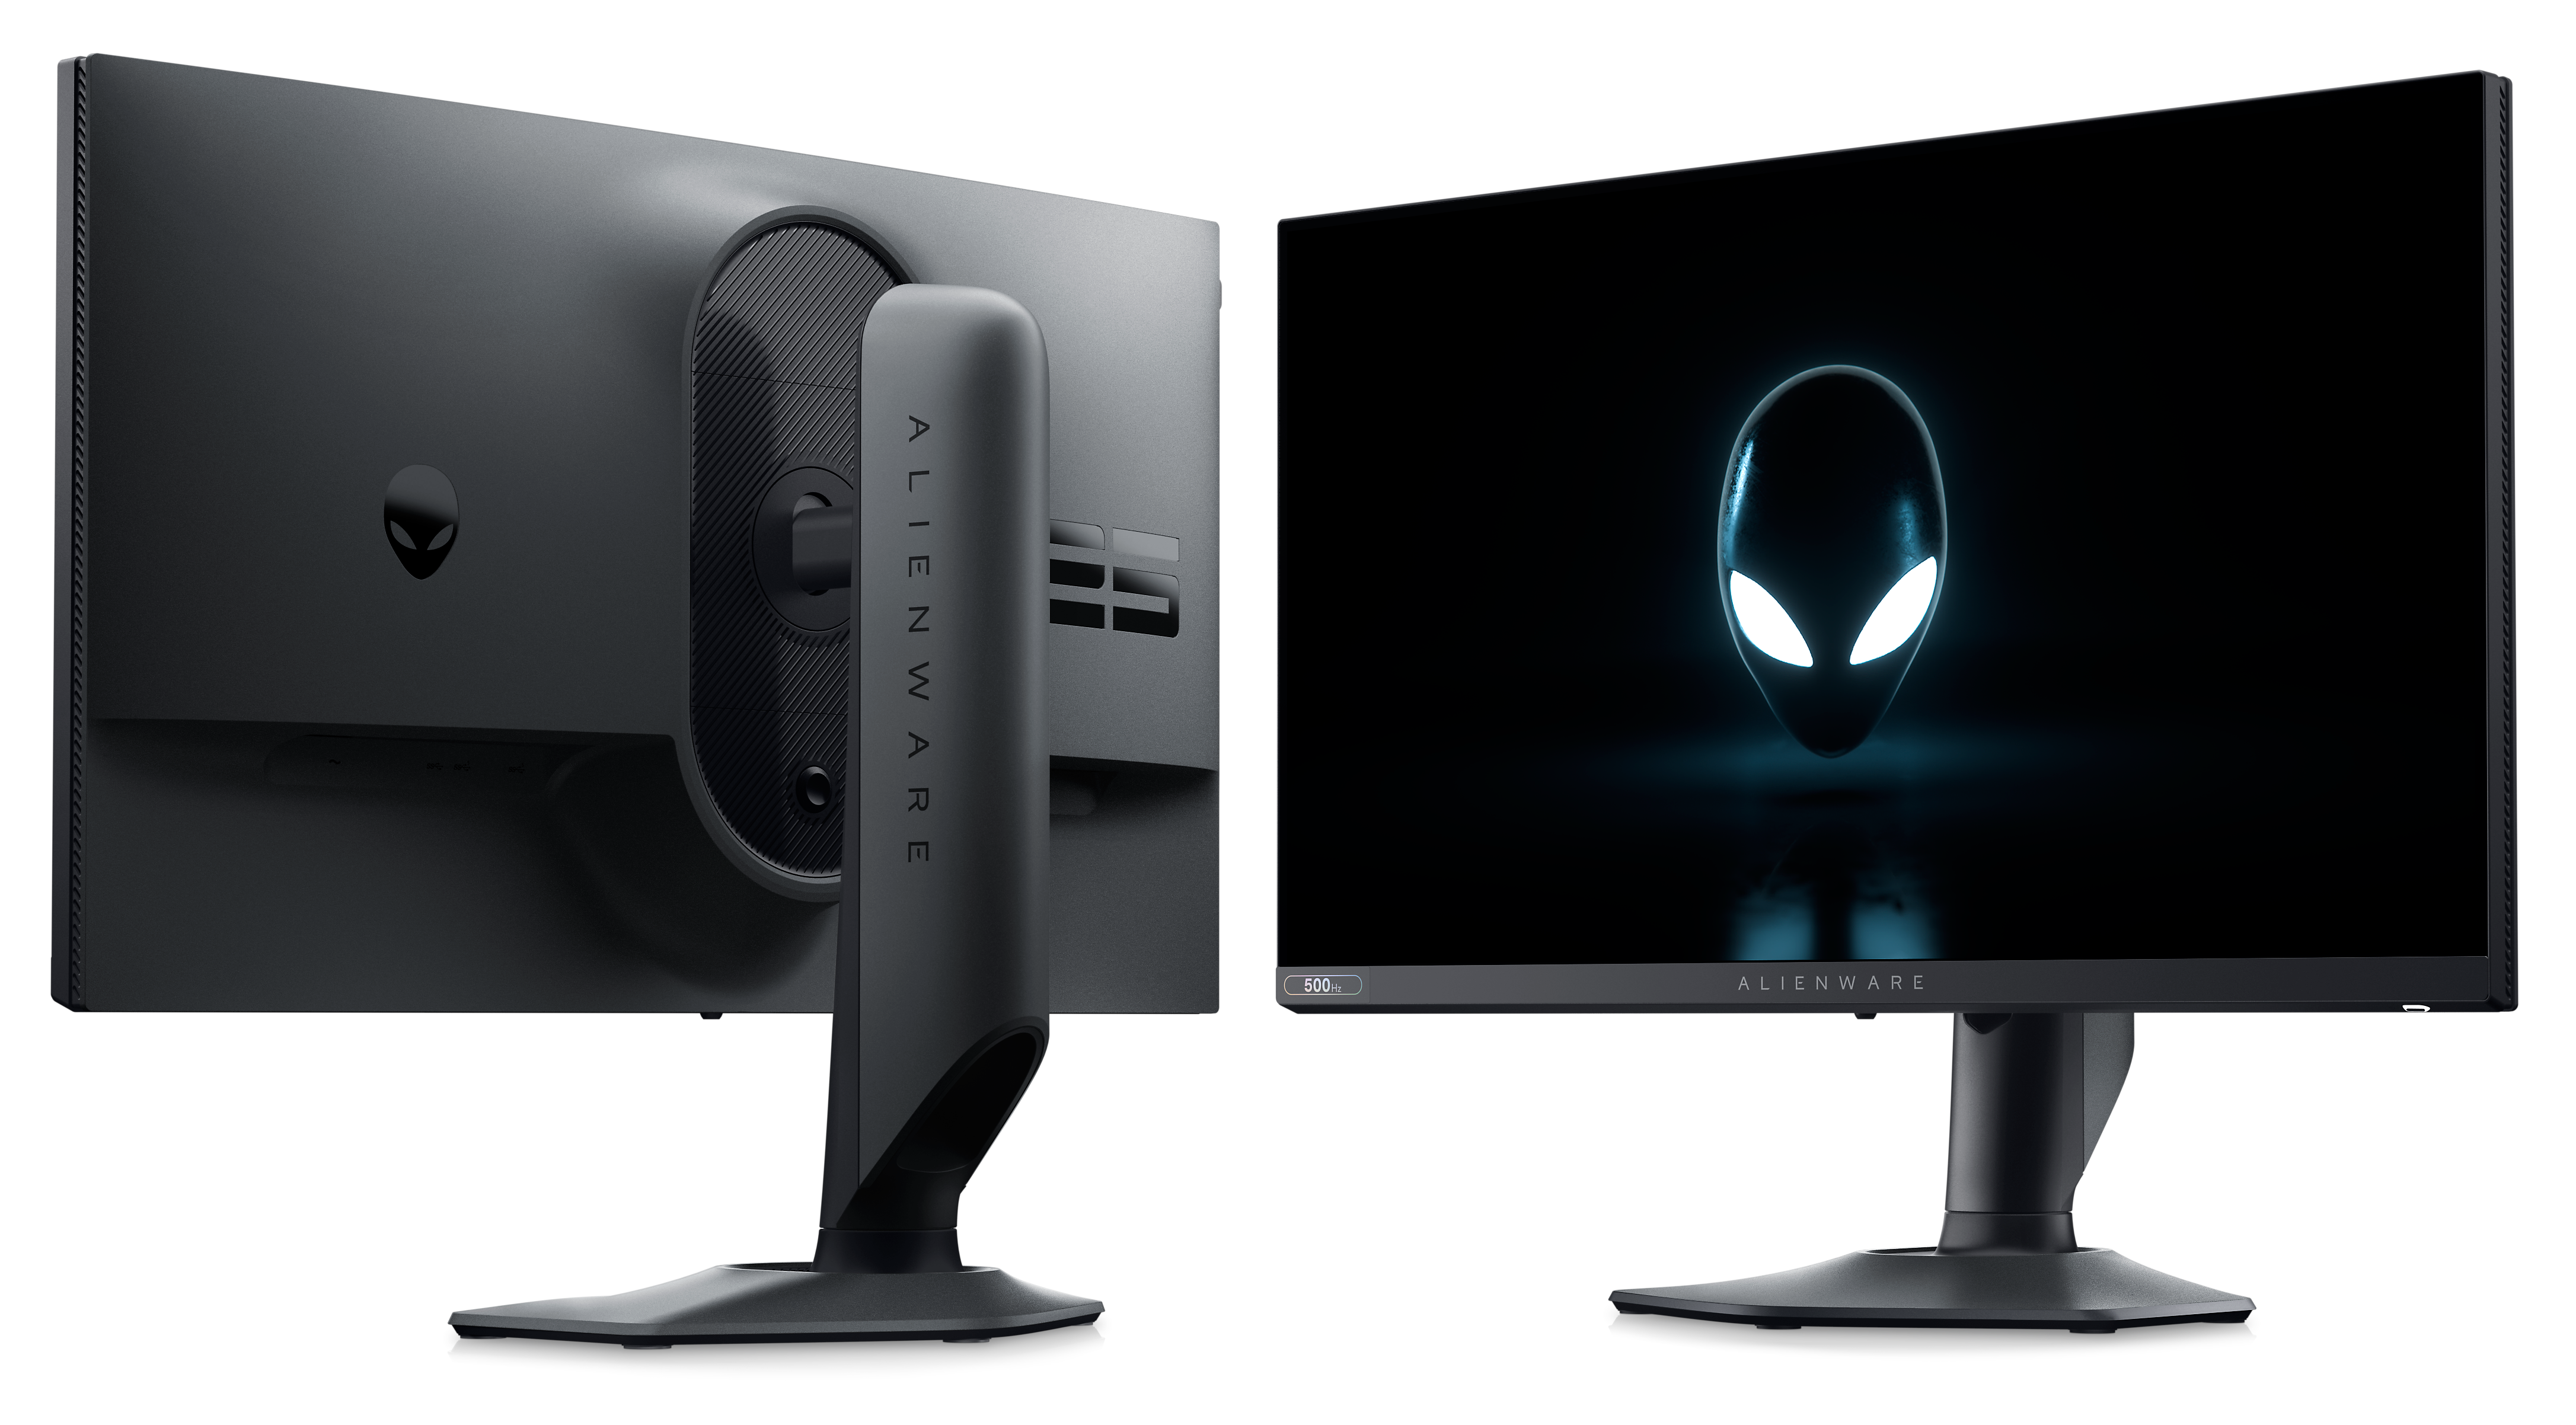 Alienware is releasing an AMD FreeSync Premium version of its 500Hz gaming monitor